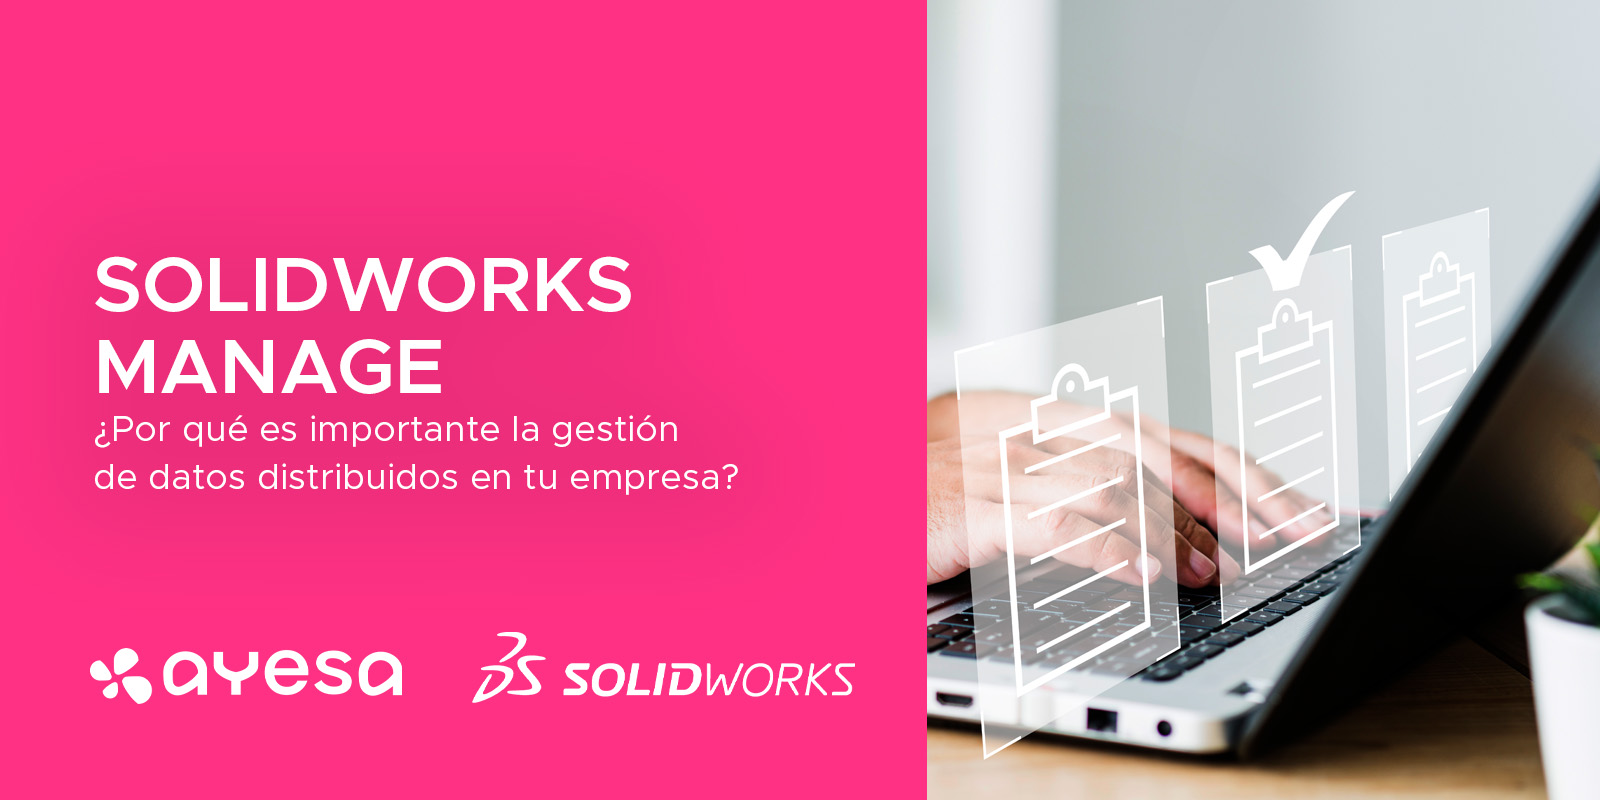 Solidworks manage